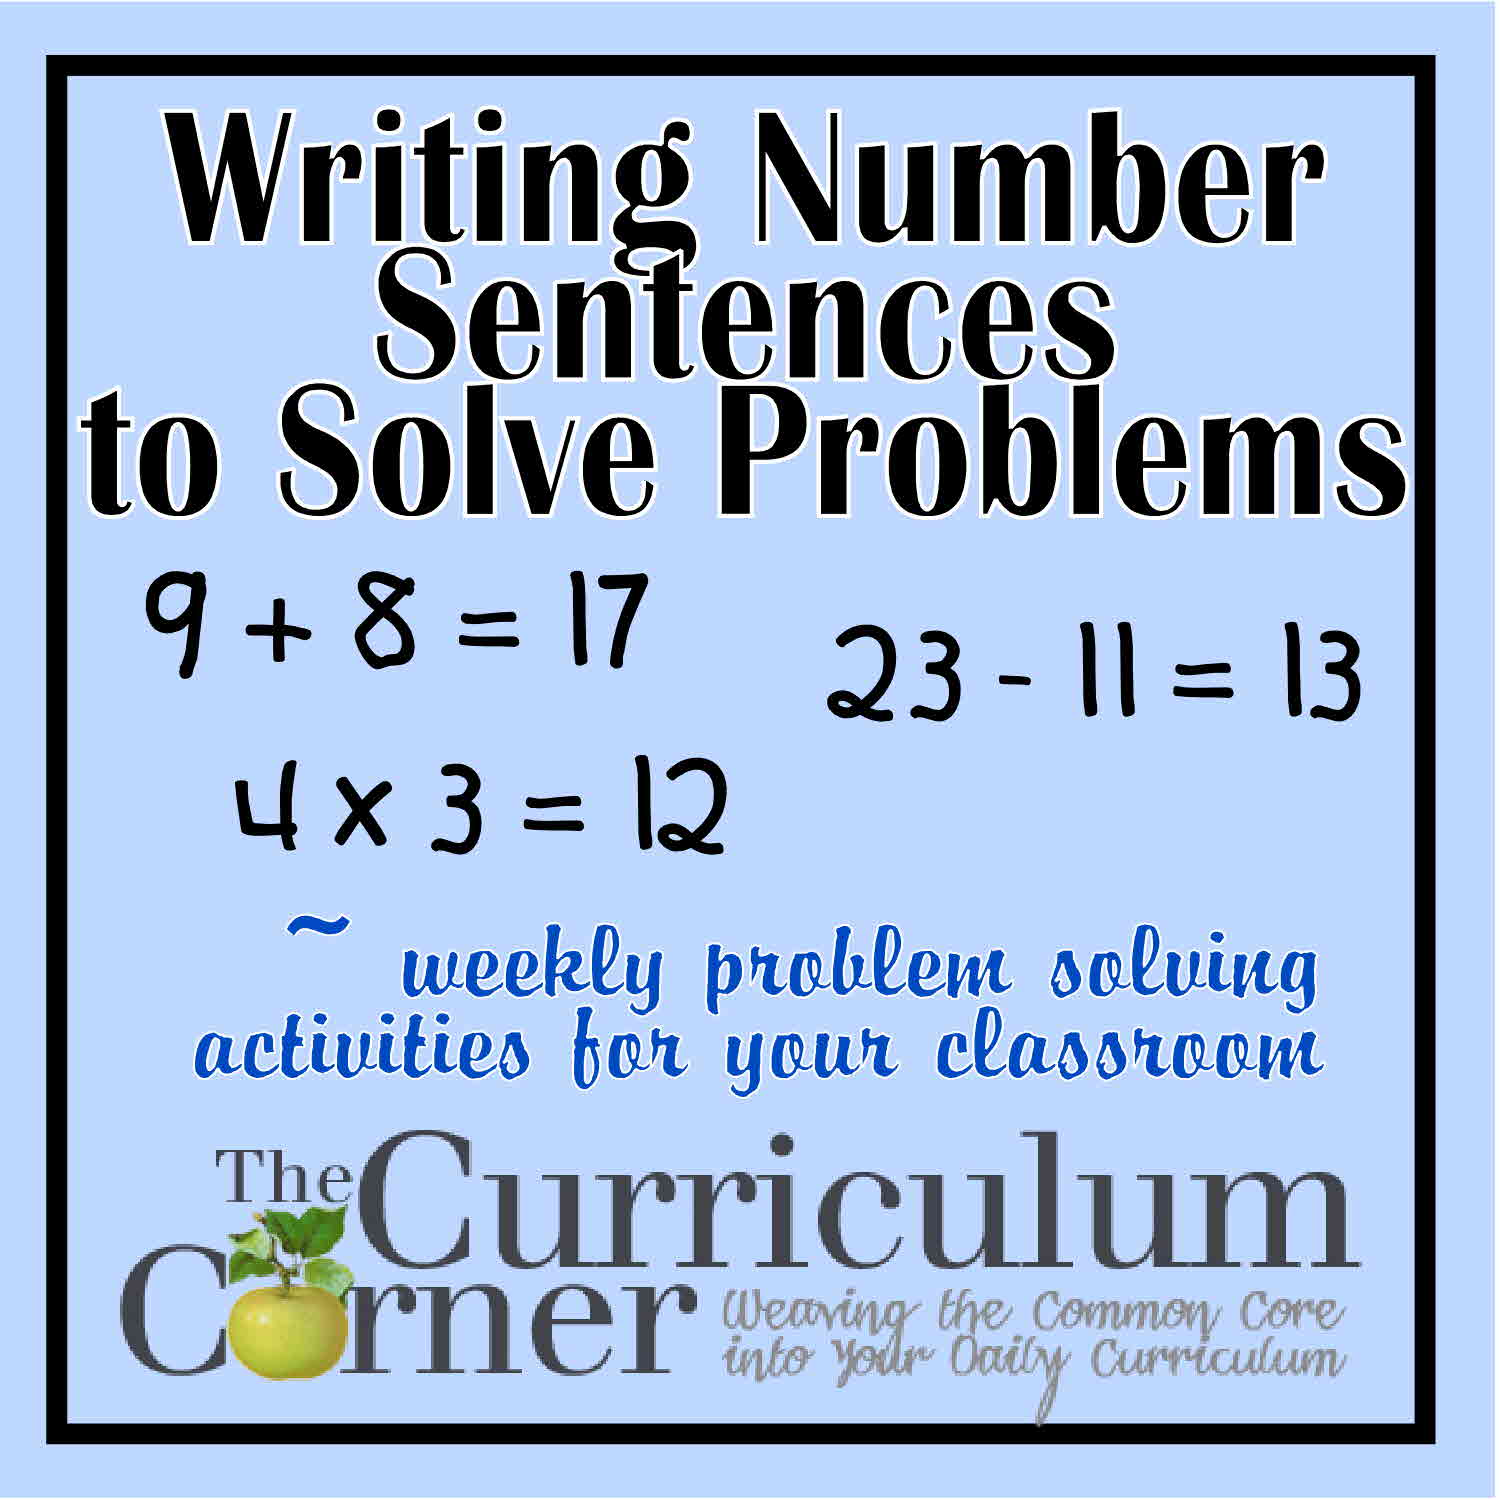 writing-number-sentences-to-solve-problems-the-curriculum-corner-123